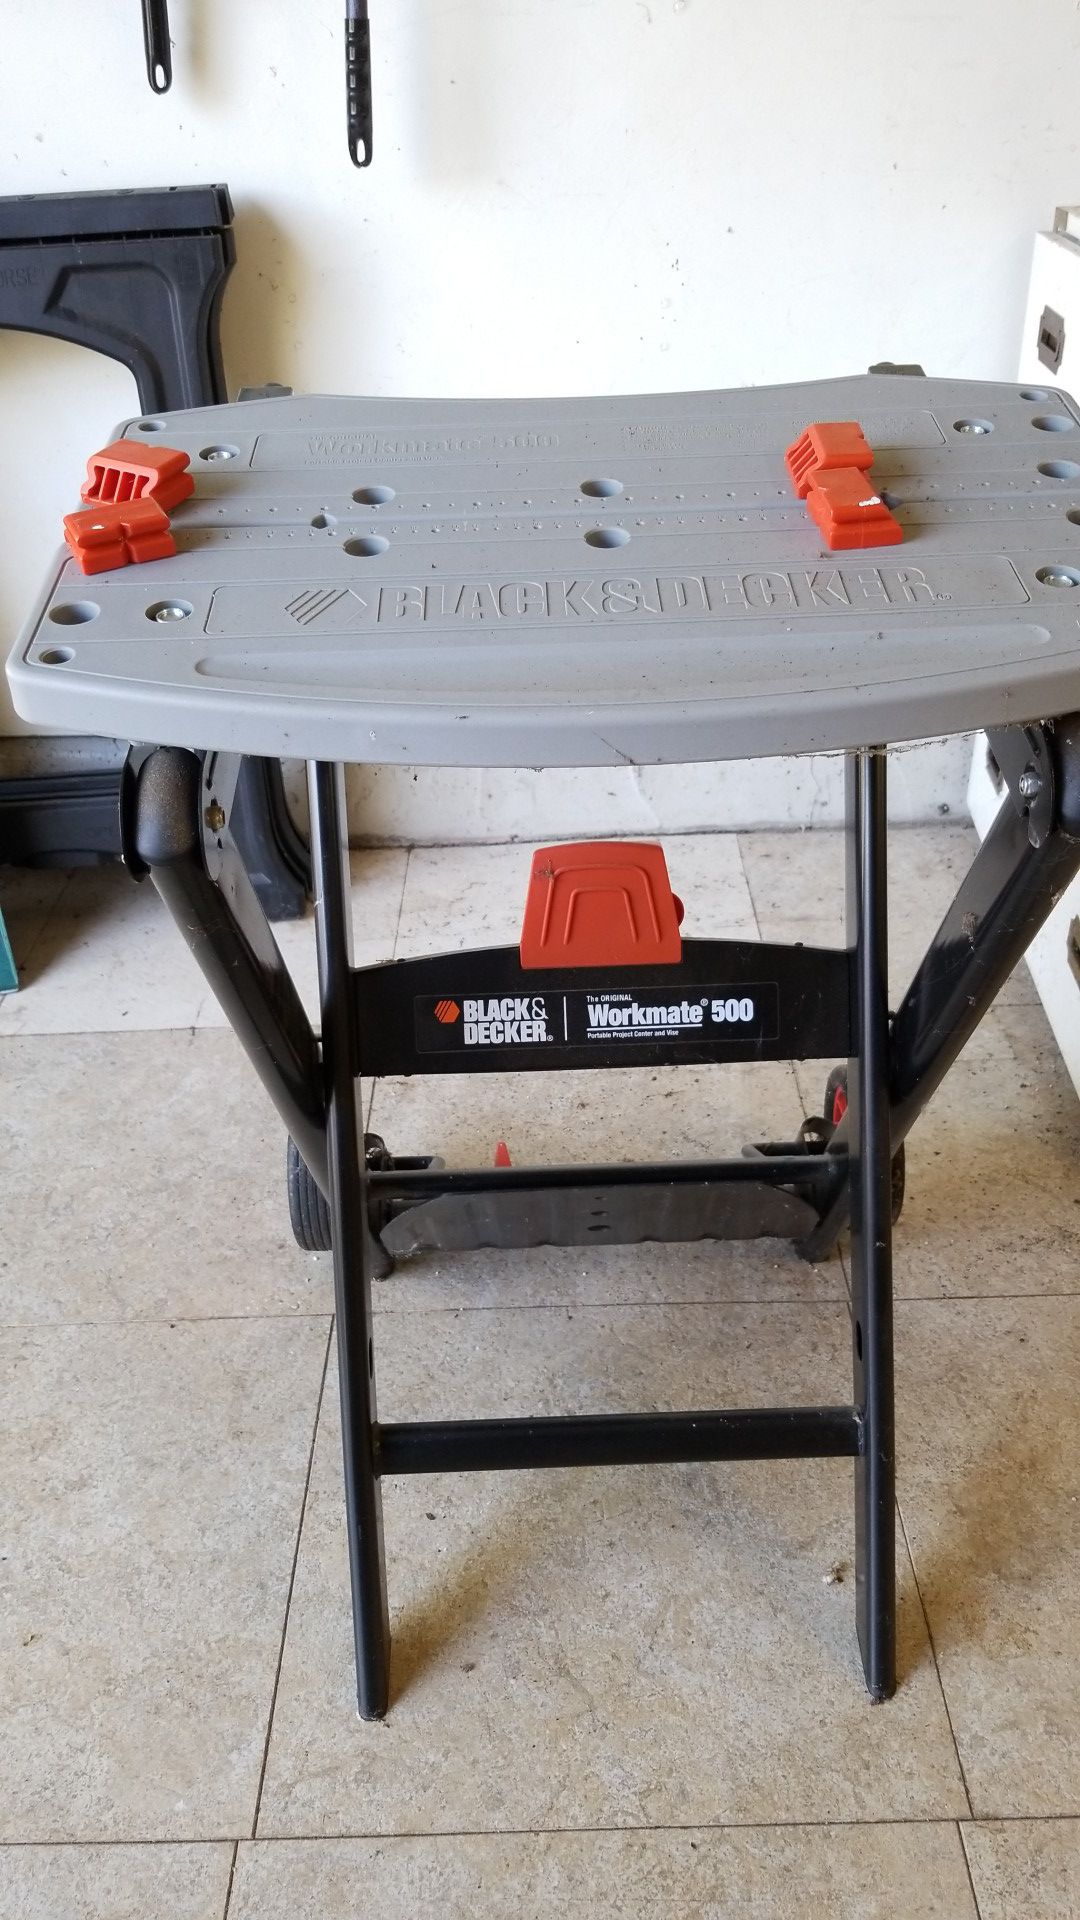 Brand New In Box, Black & Decker, Workmate, 425 Portable Work Center for  Sale in Riverside, CA - OfferUp